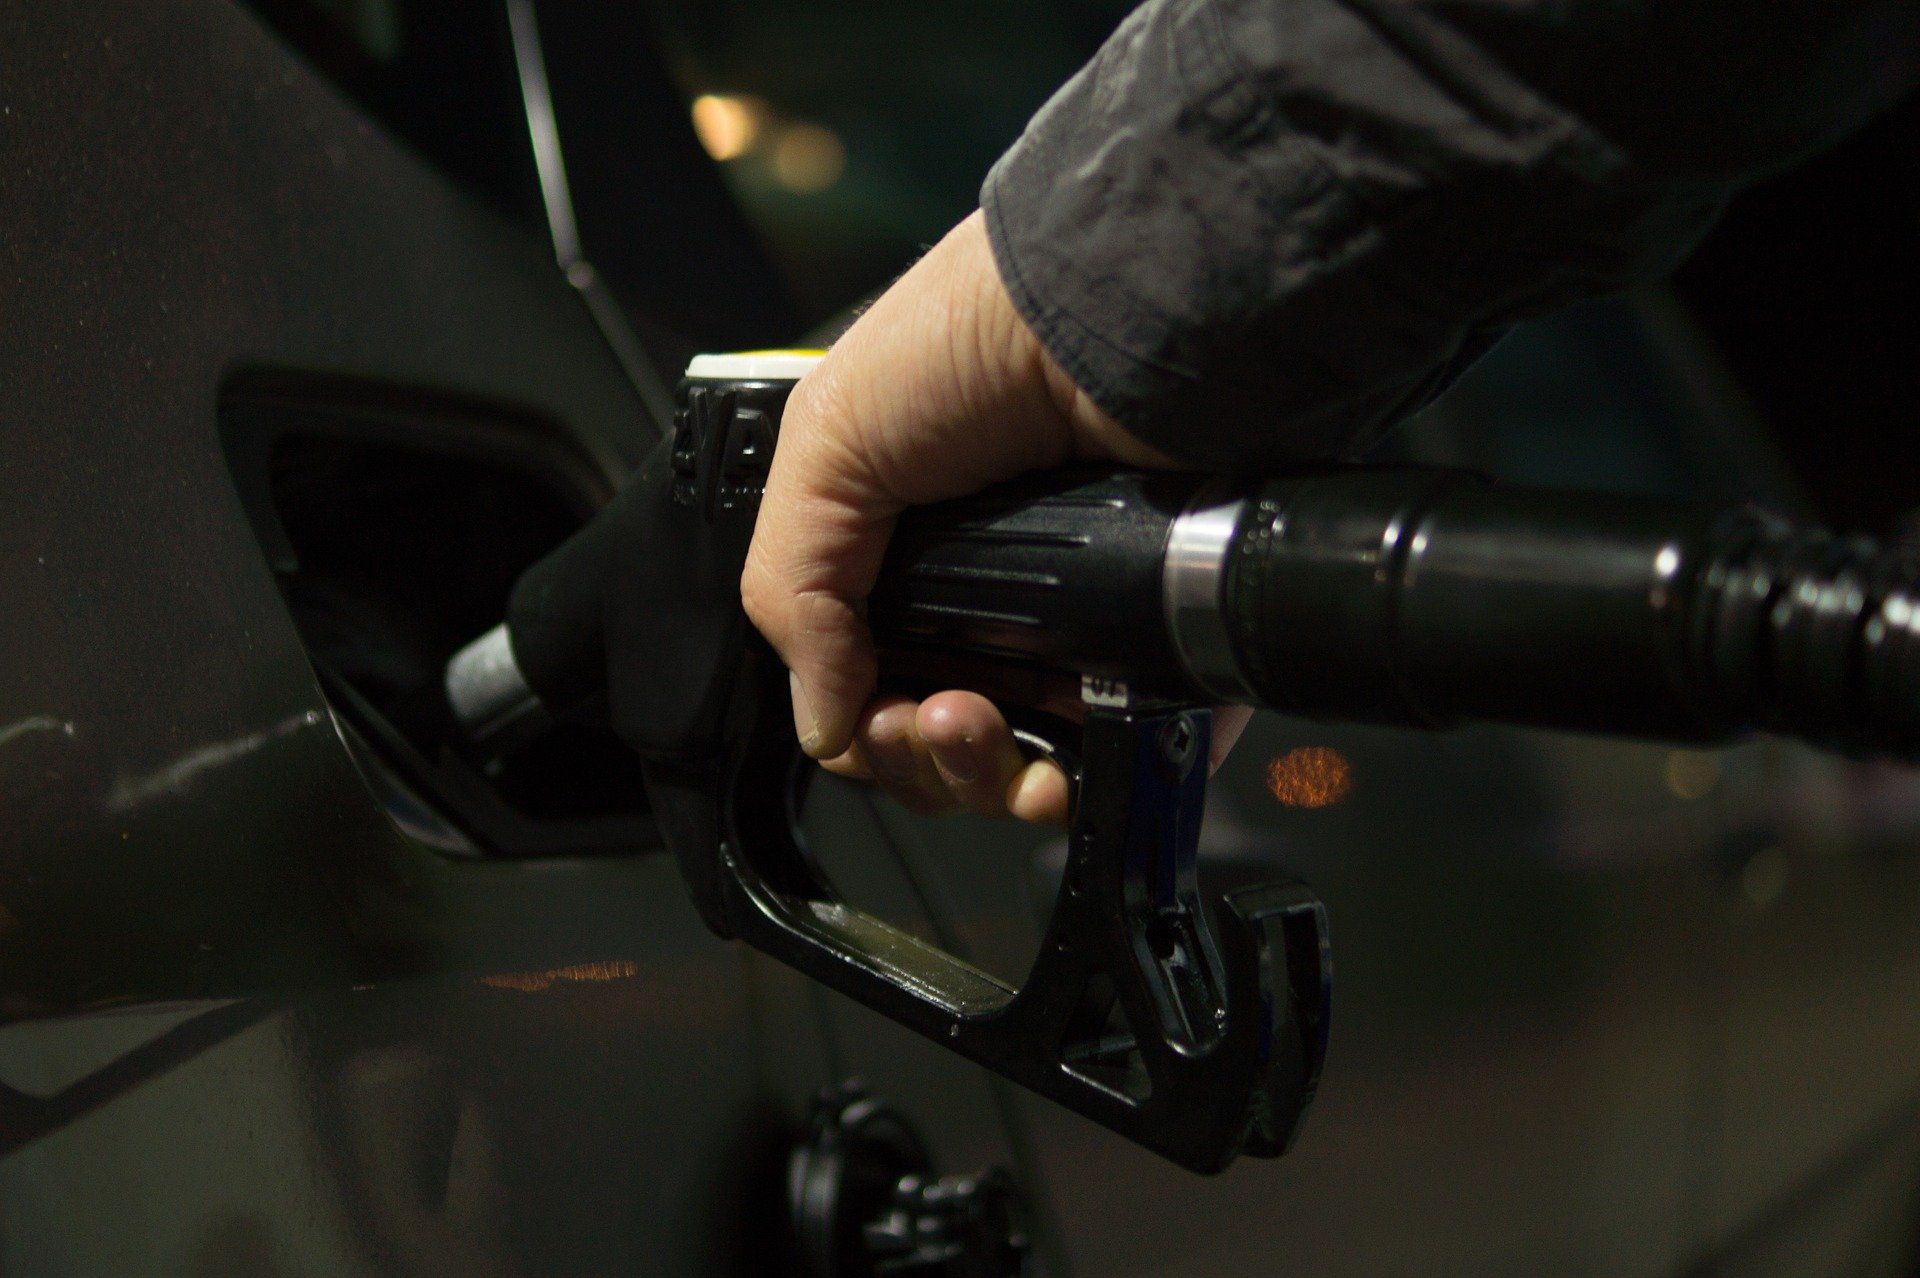 Fuel prices: Petrol priced at Rs 95.41, diesel Rs 86.67 in Delhi on March 15, 2022